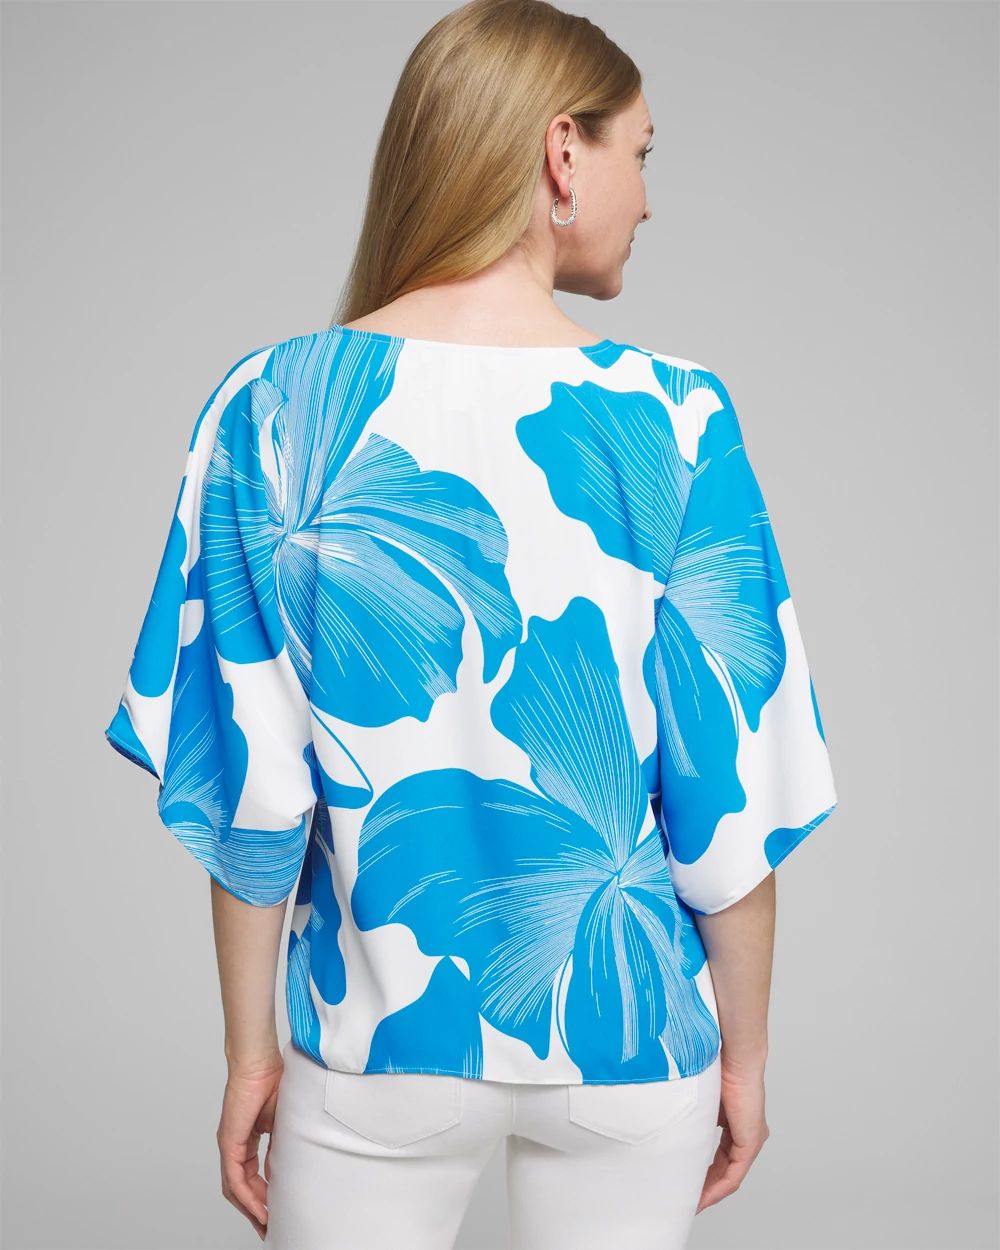 Outlet WHBM Elbow-Sleeve Kimono click to view larger image.